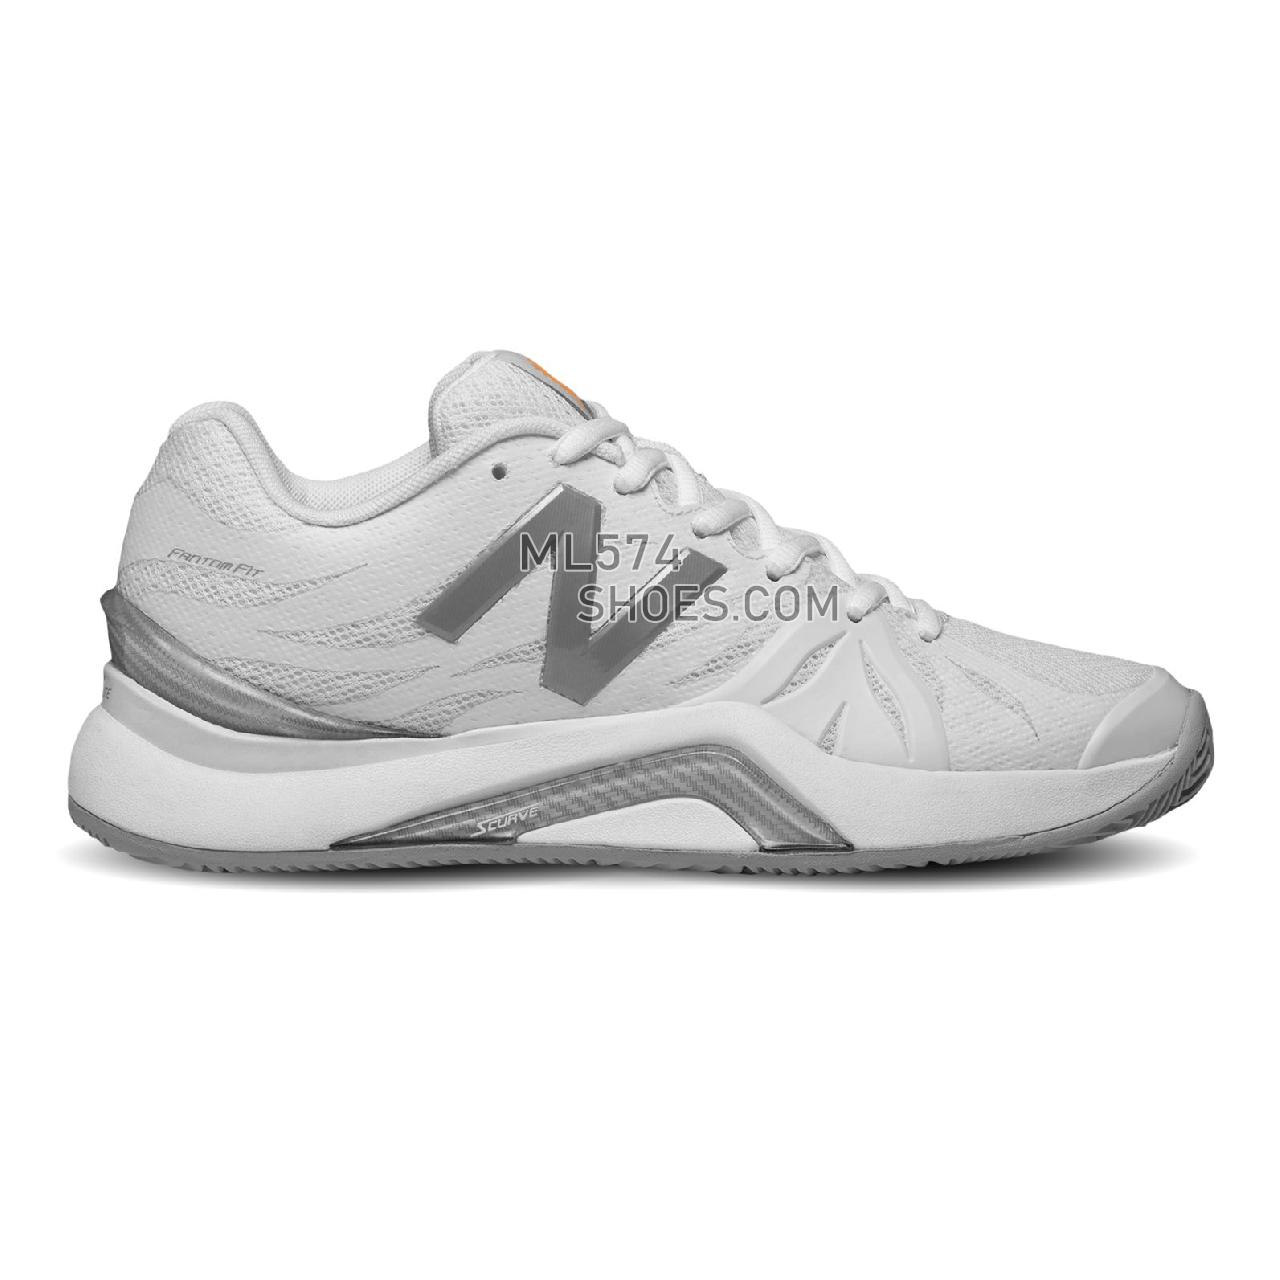 New Balance 1296v2 - Women's 1296 - Tennis / Court White with Icarus - WC1296W2